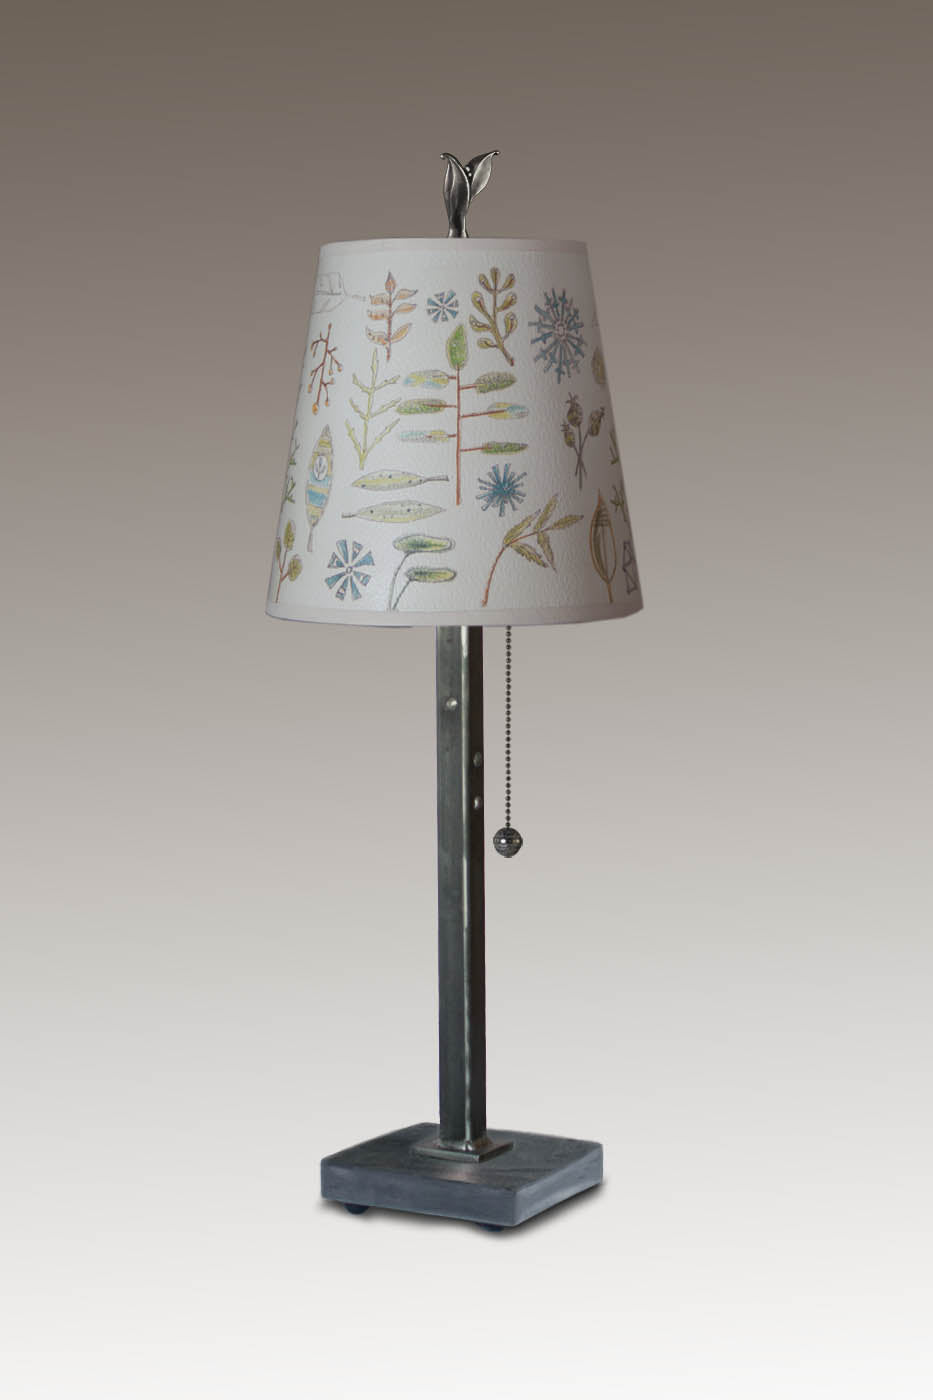 Steel Table Lamp with Small Drum Shade in Field Chart